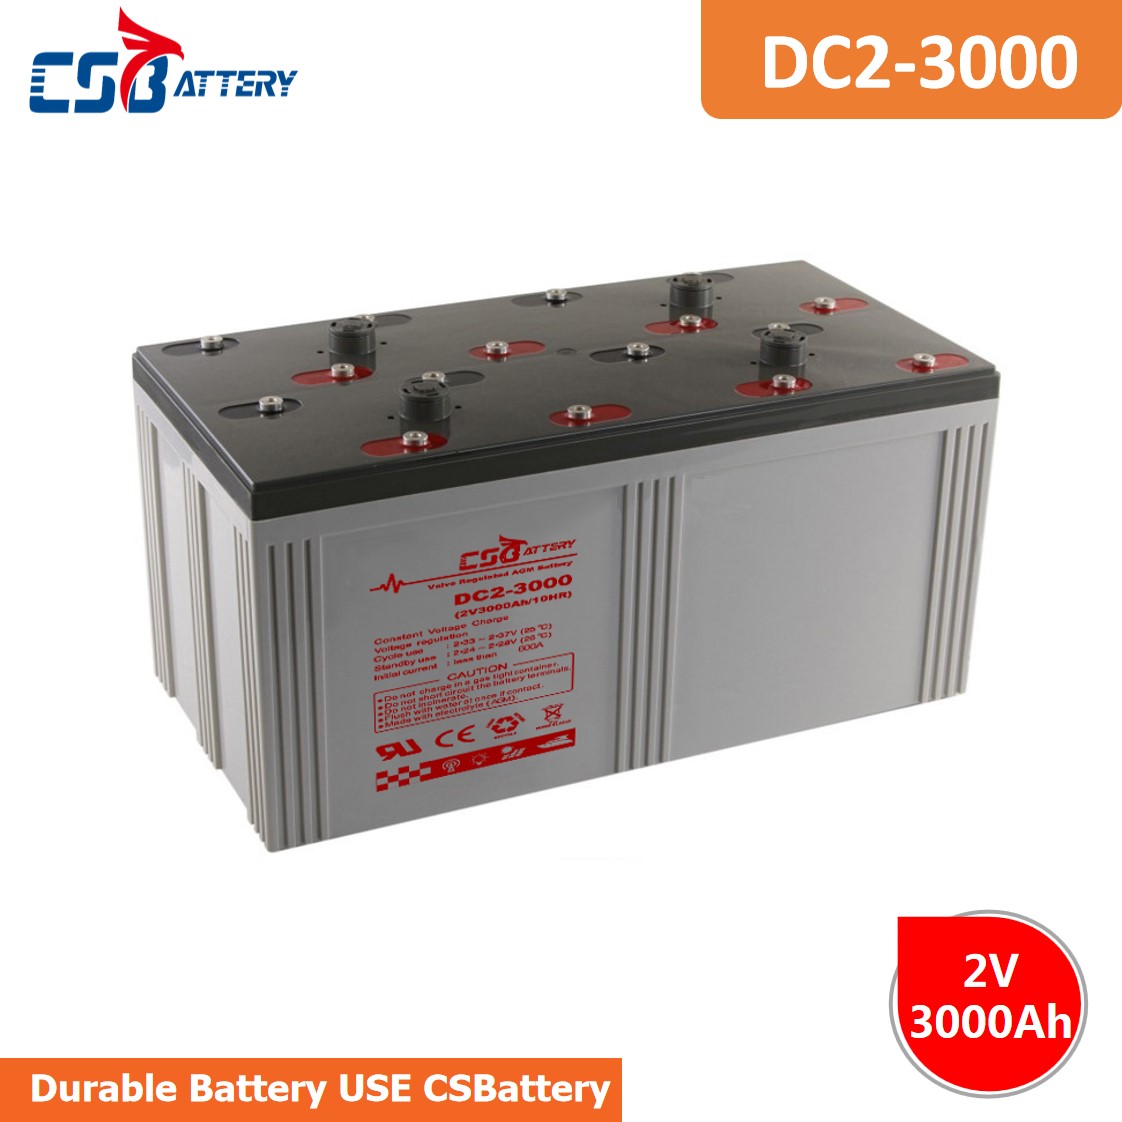 CSBattery 2V 3000Ah backup power Lead acid Battery for Generator/Power-Station/Automotive-Vehicle/submersible-Pumps 							